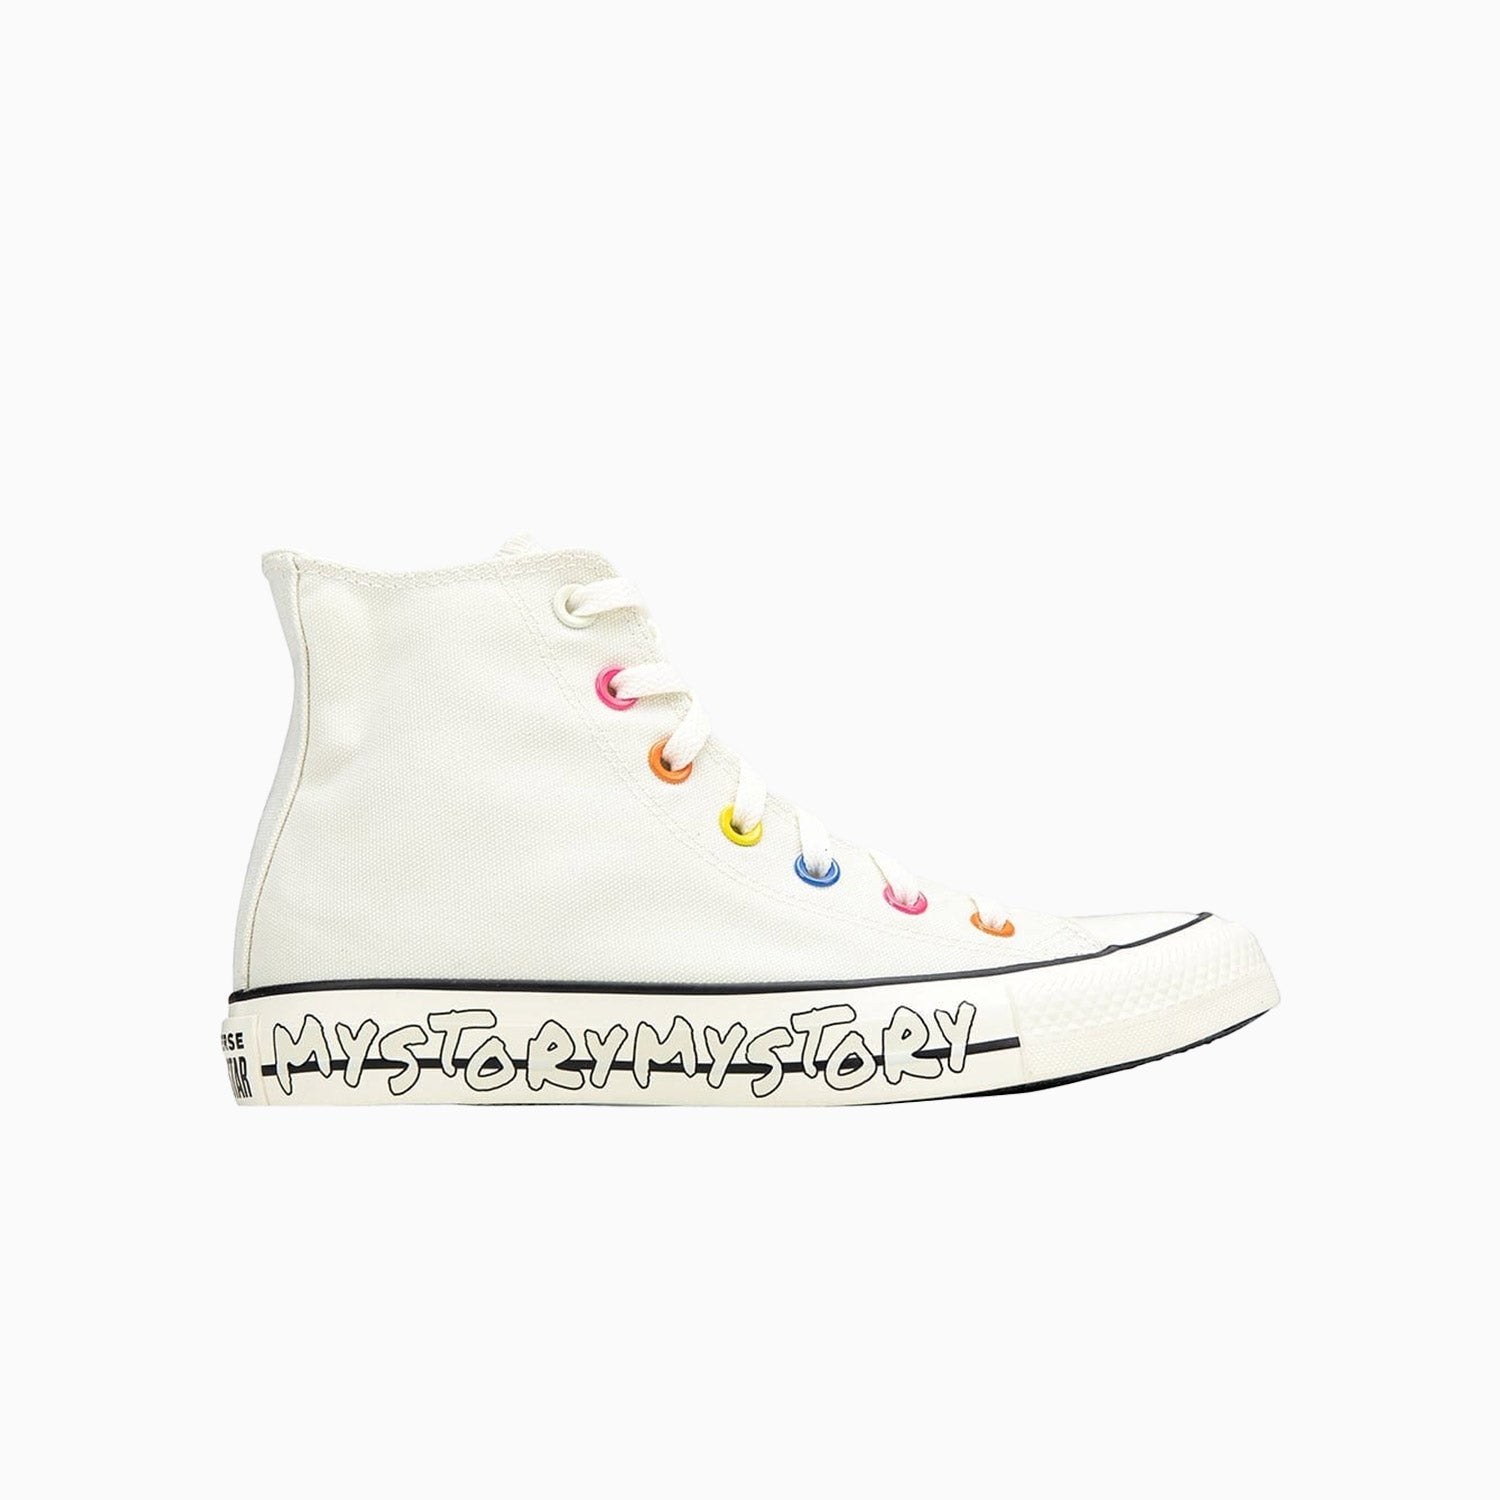 converse-chuck-taylor-all-star-high-my-story-170293f